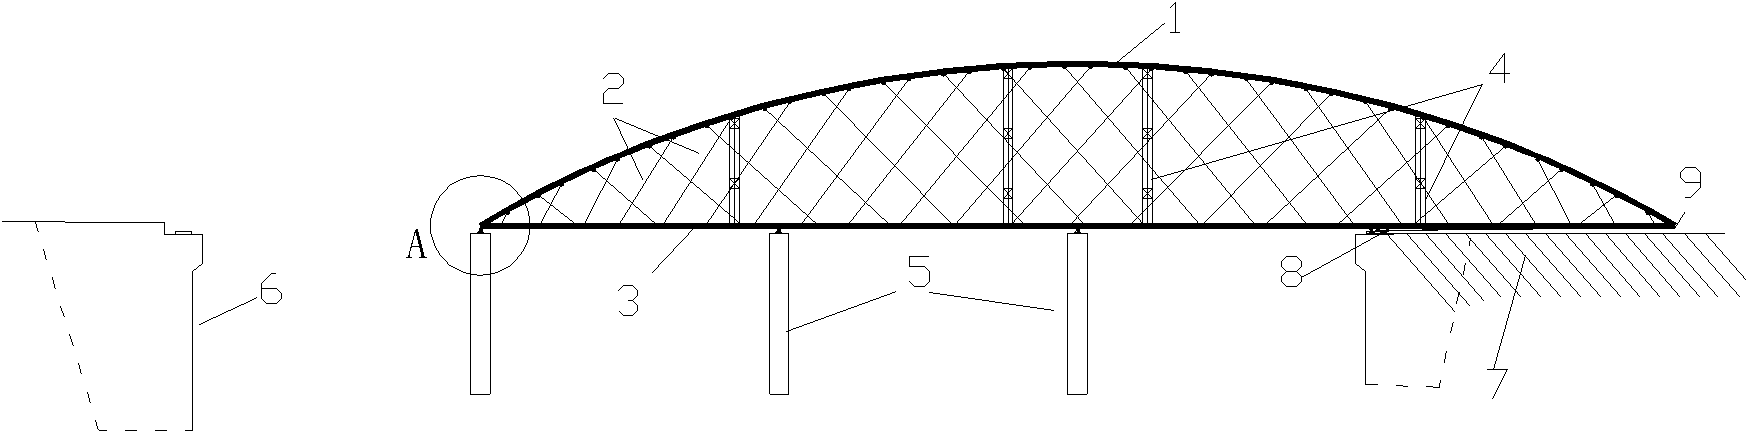 Integral Pushing Construction Method of Network Tied Arch Bridge